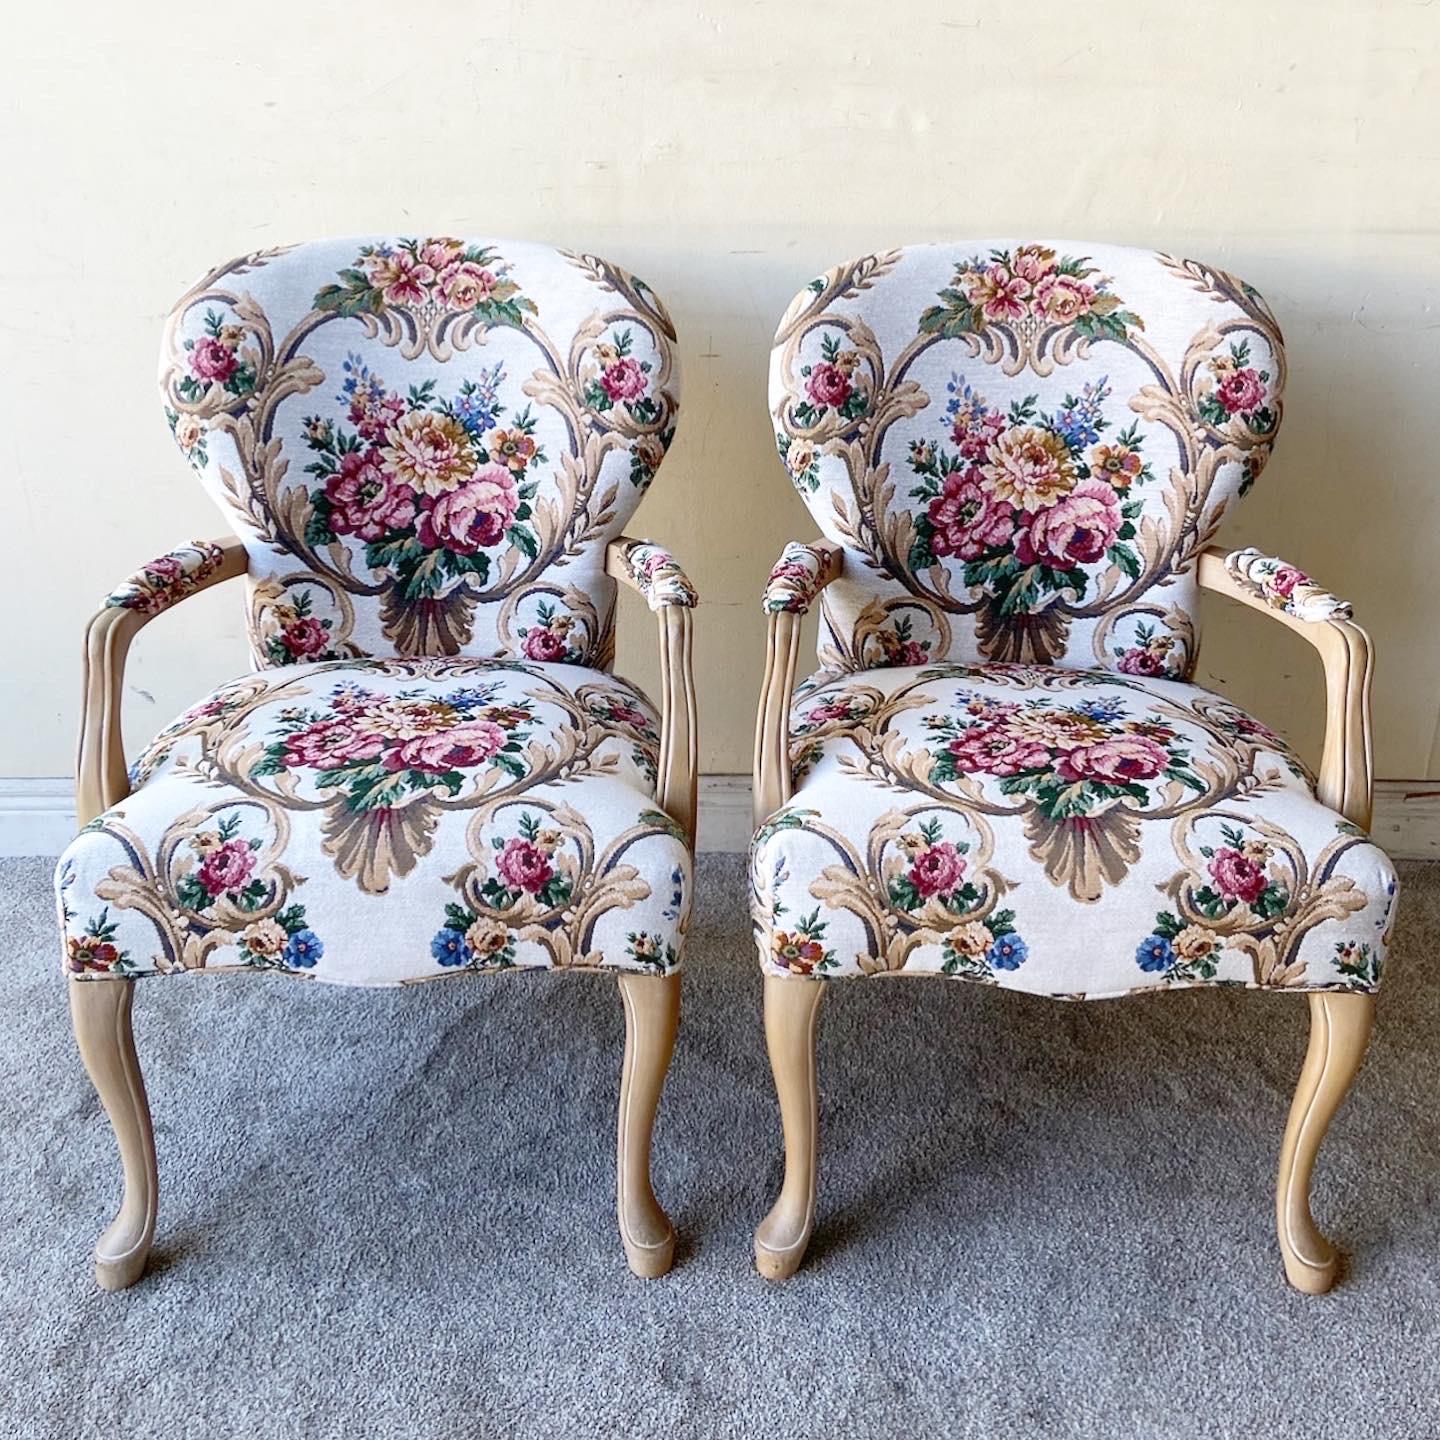 Amazing pair of vintage arm chairs. Each feature a floral upholstery with a wooden frame.
 